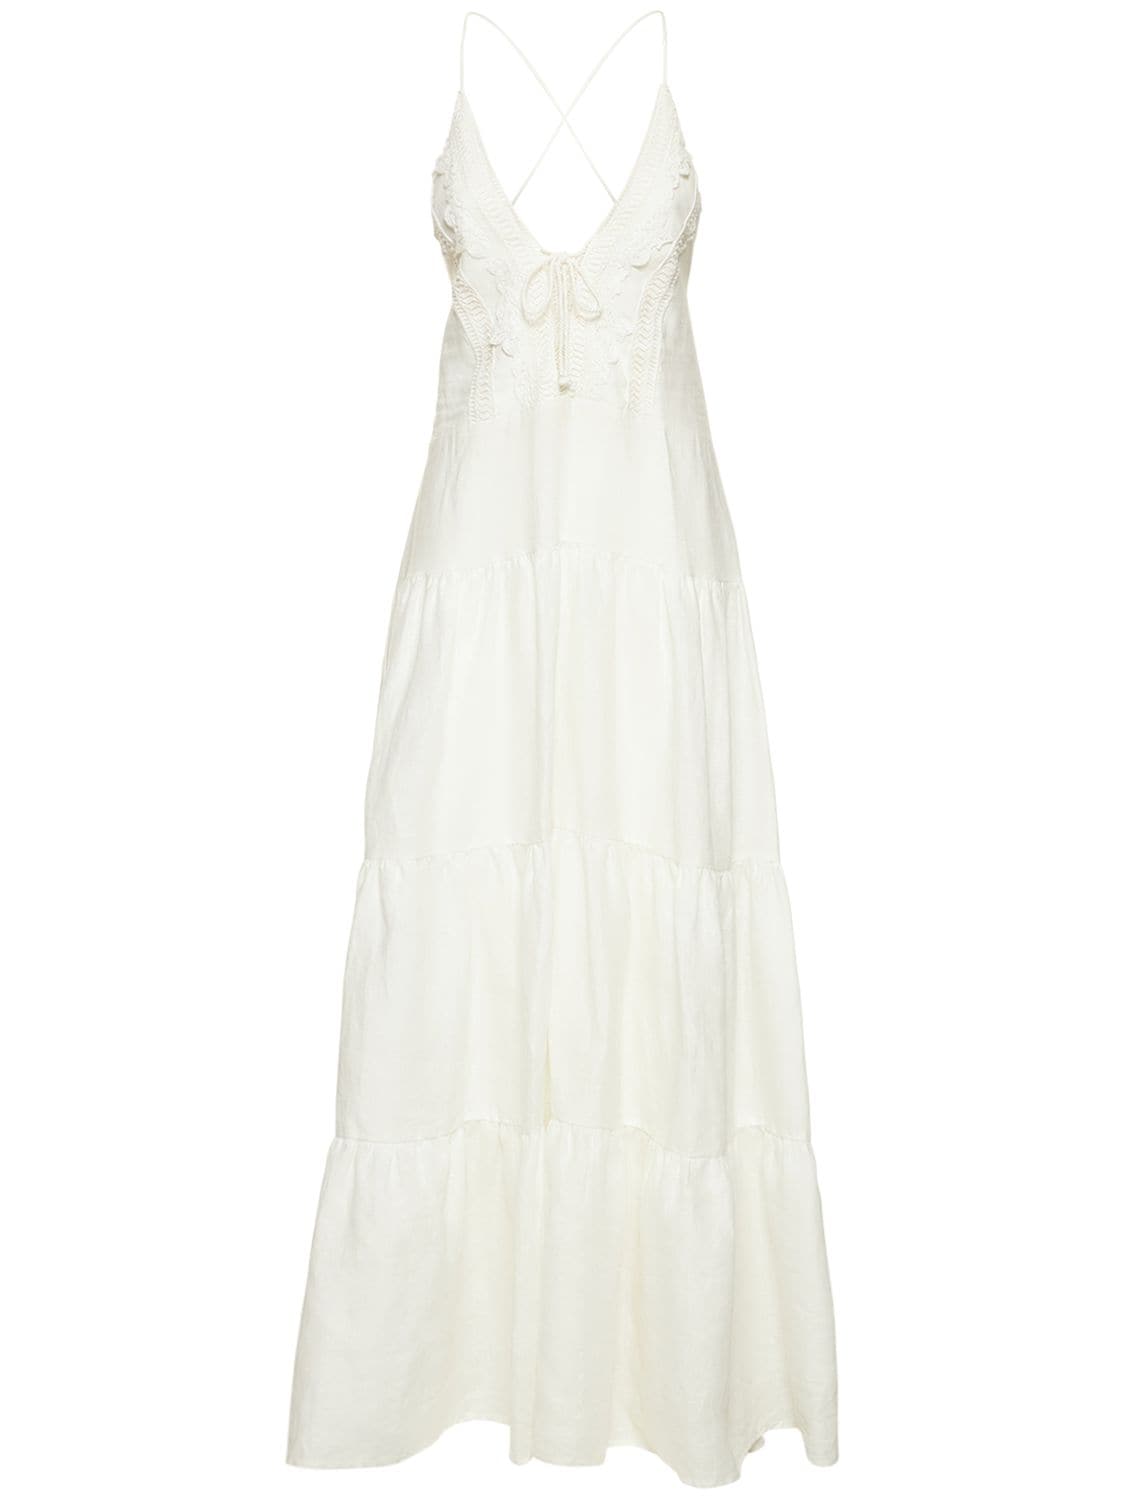 ERMANNO SCERVINO Embroidered Lace Long Dress